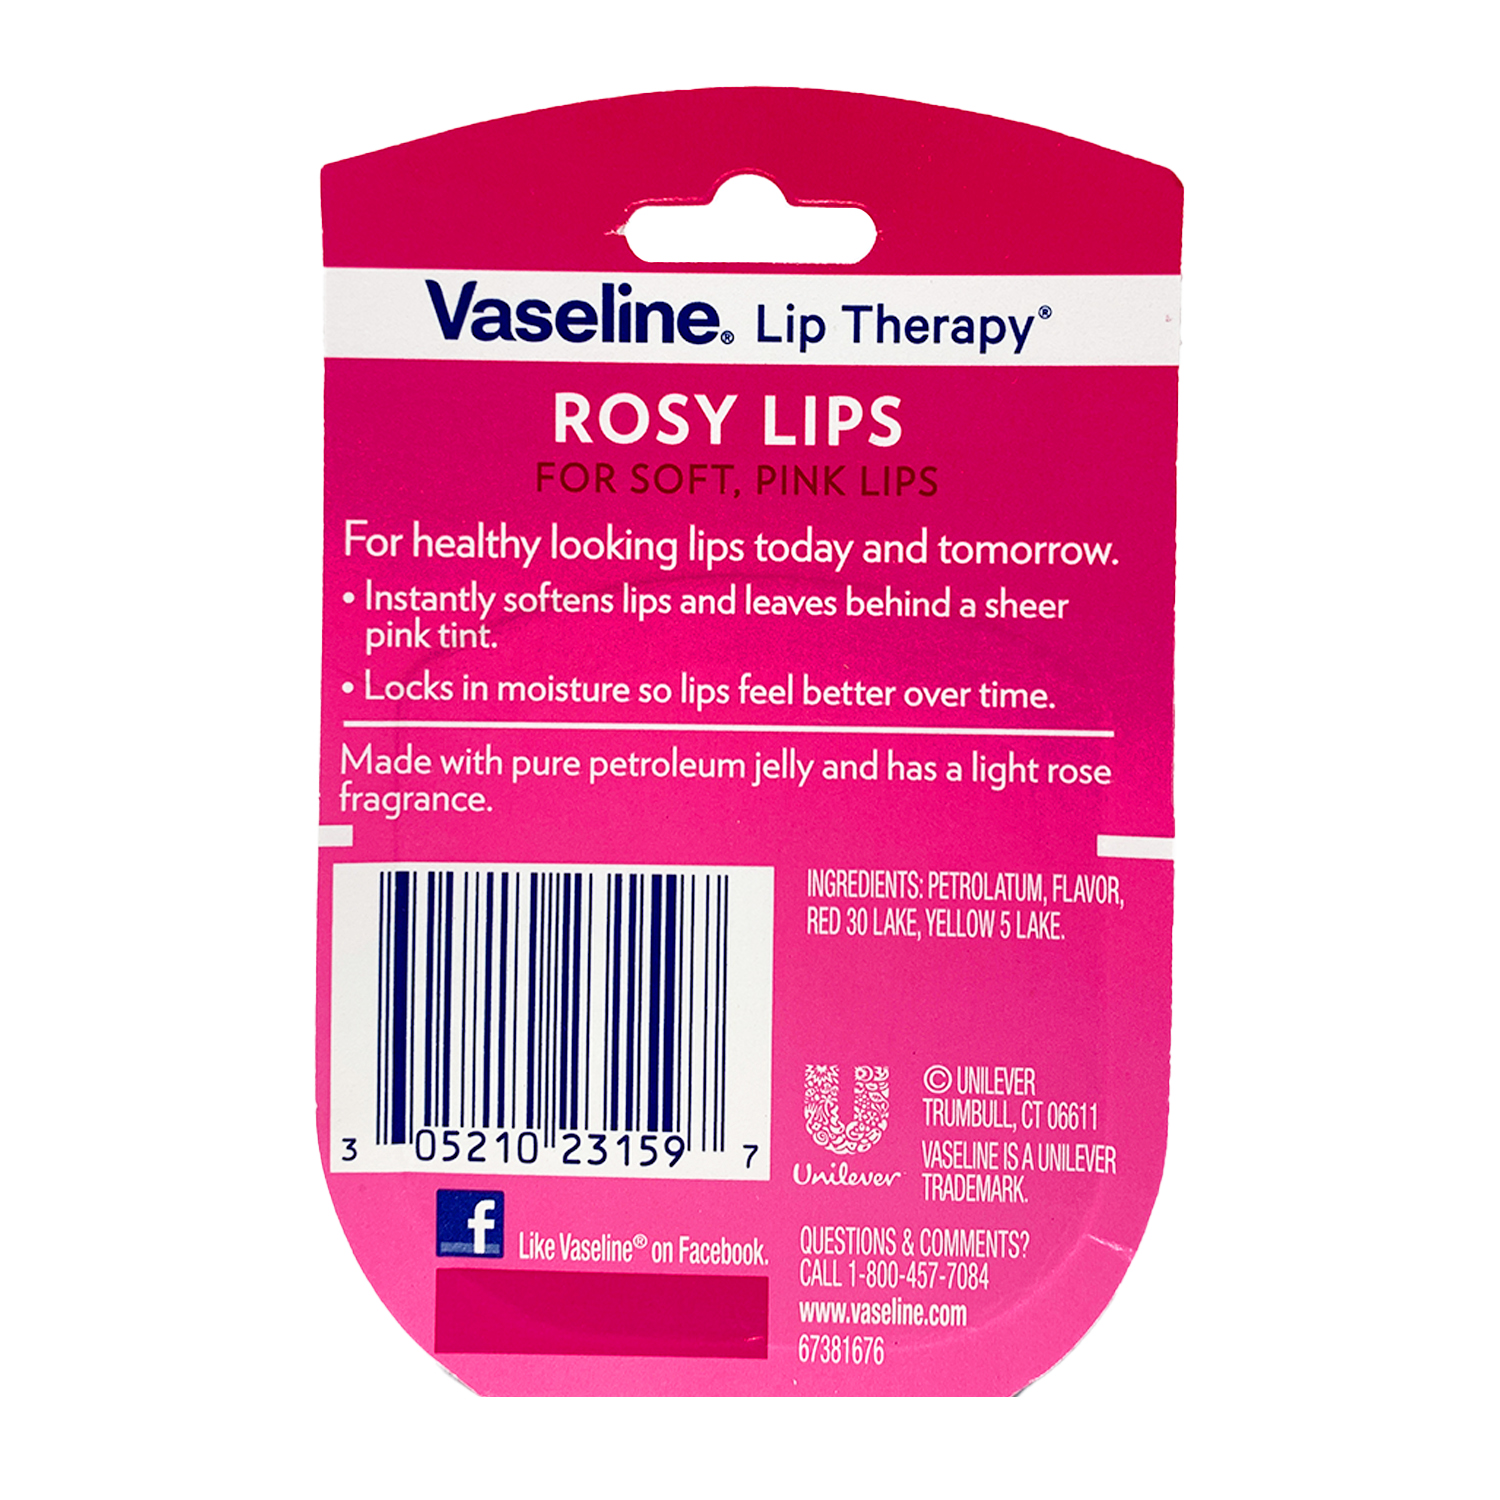 4 Pack Vaseline Rosy Lips Lip Therapy for Soft, Pink Lips, 0.25oz Each - image 2 of 3